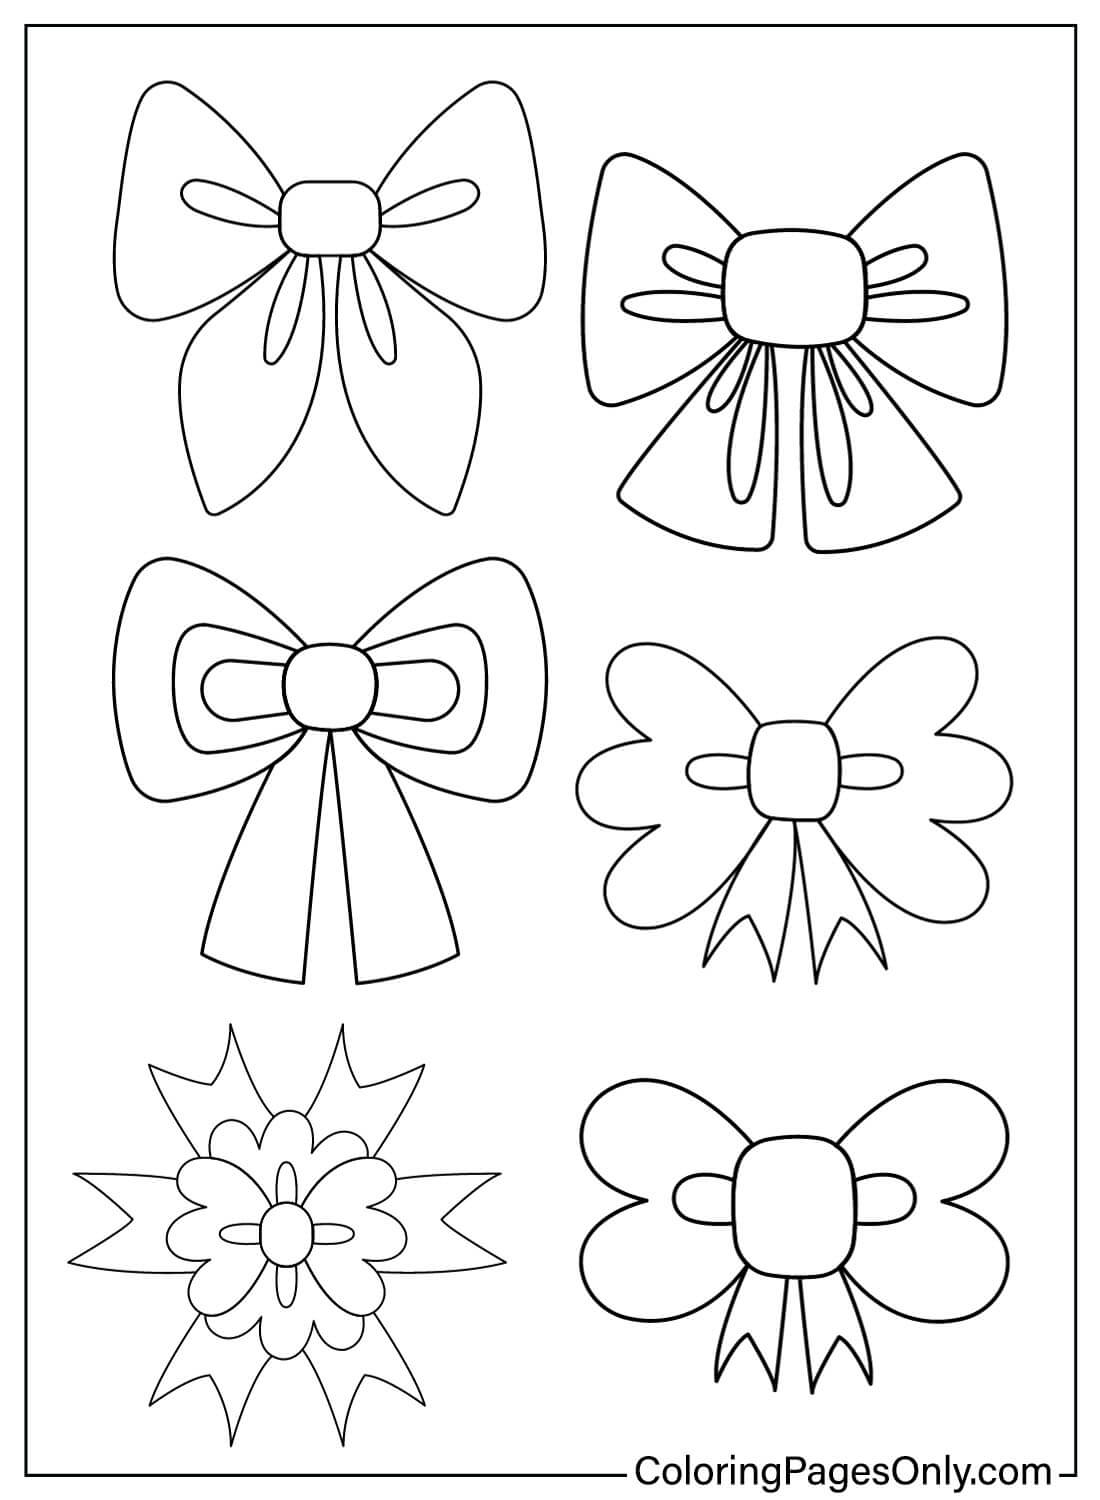 Coloring Book Bow from Bow